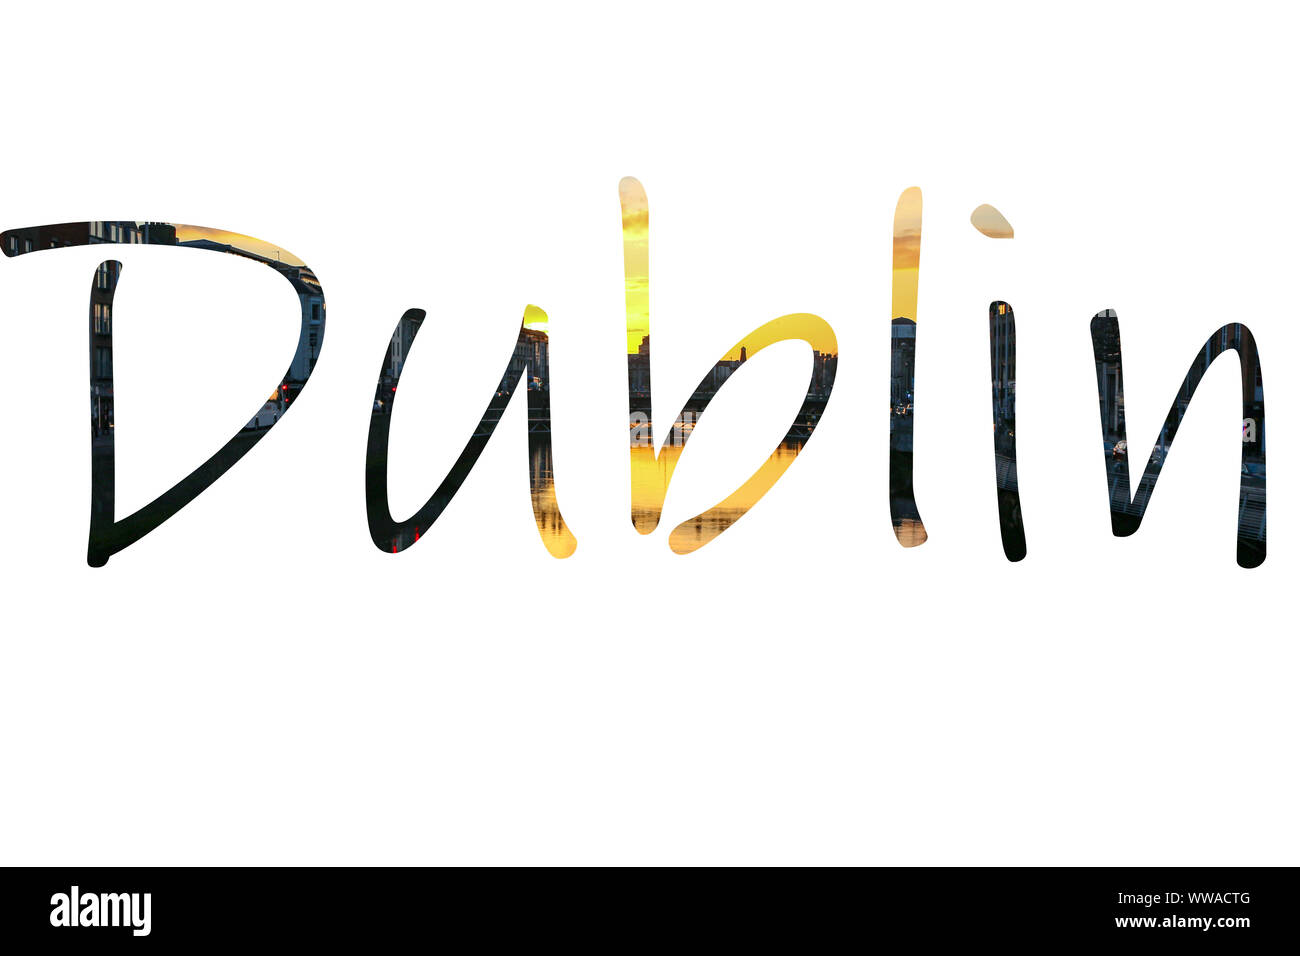 The word Dublin filled in by the Dublin skyline at sunset. Great for designs or other Ireland usage. Stock Photo